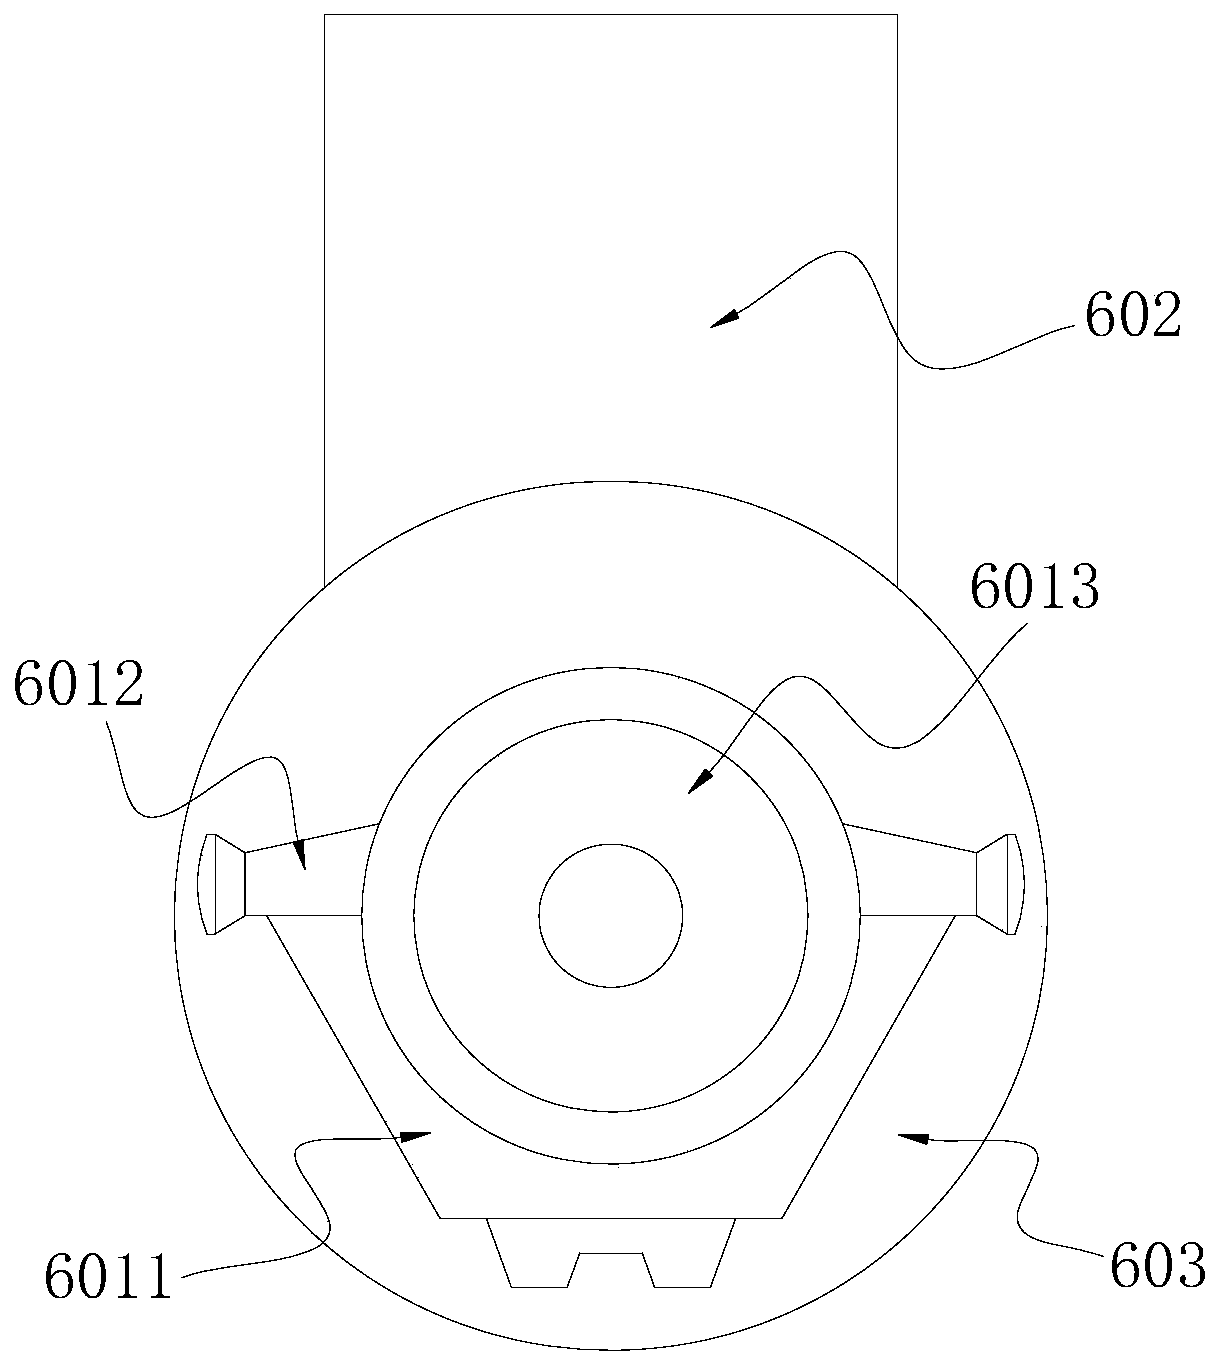 Semiconductor wafer cutting device with pneumatic stability and based on magnetic pole pressurizing principle